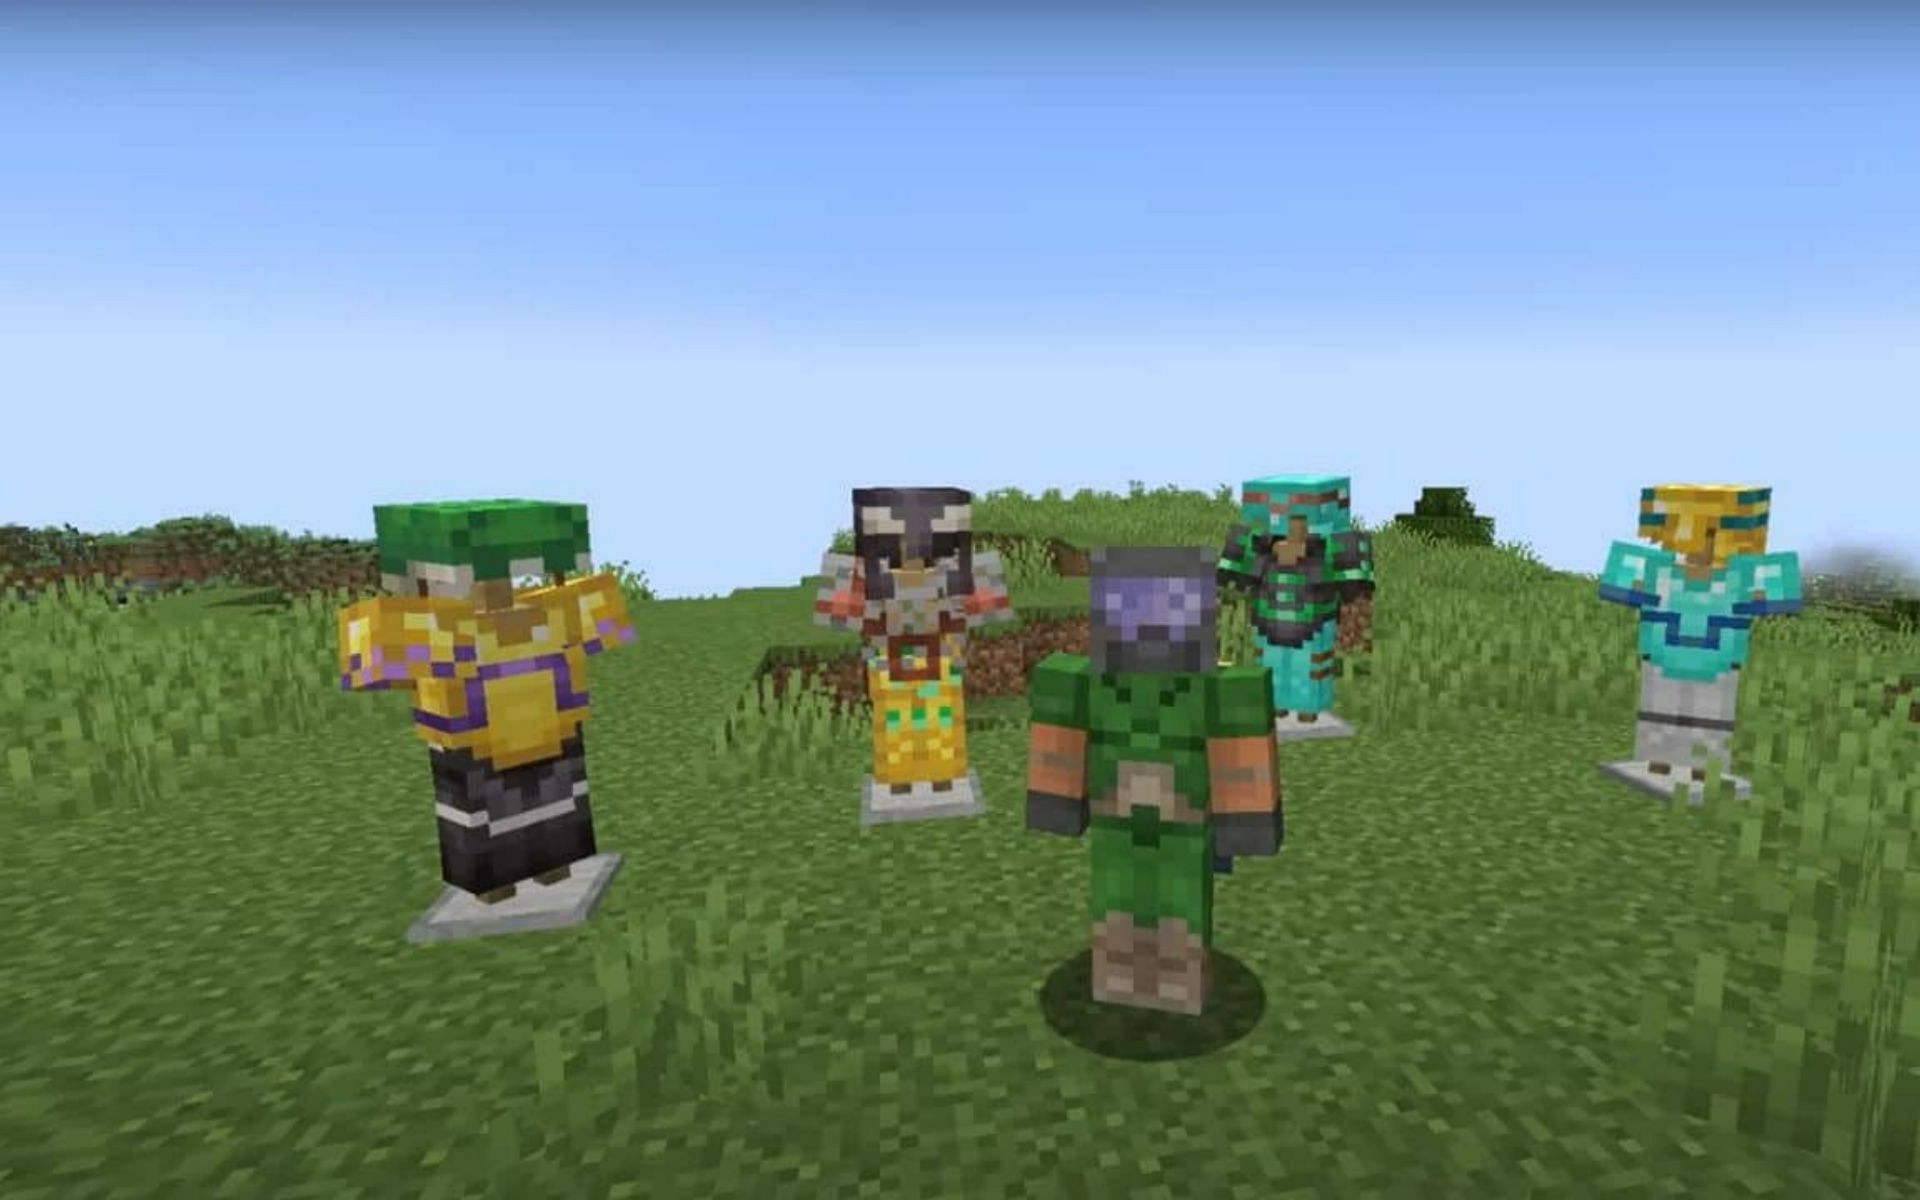 Armor trims are the latest trend in Minecraft (Image via Mojang)